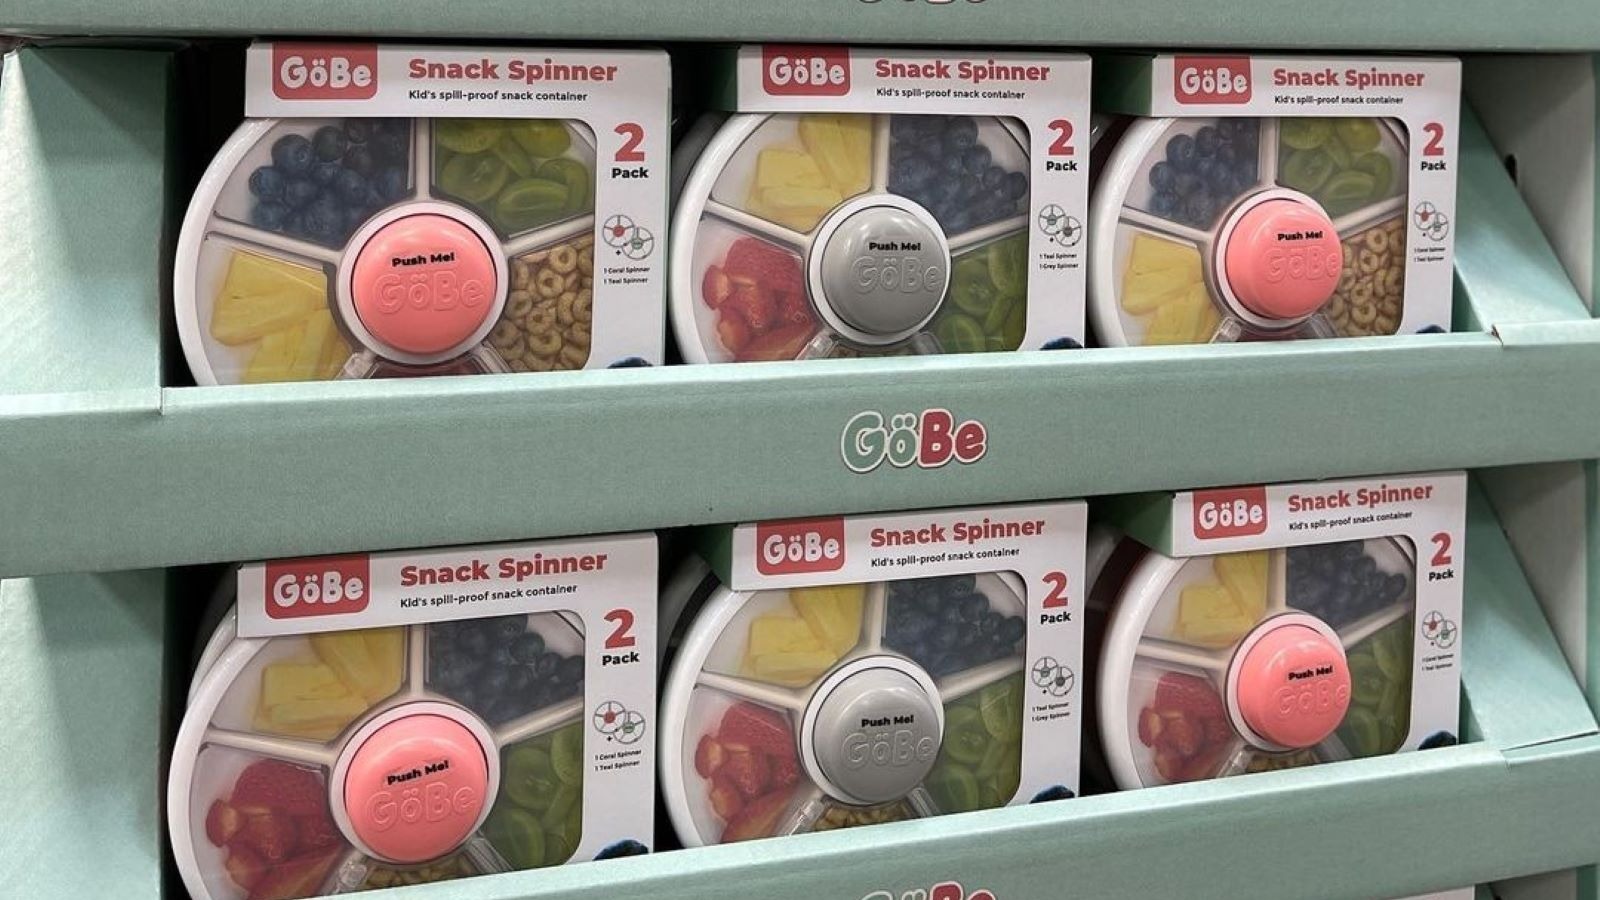 Become a Coupon Queen - GoBe Snack Spinner - Save $6 Now!